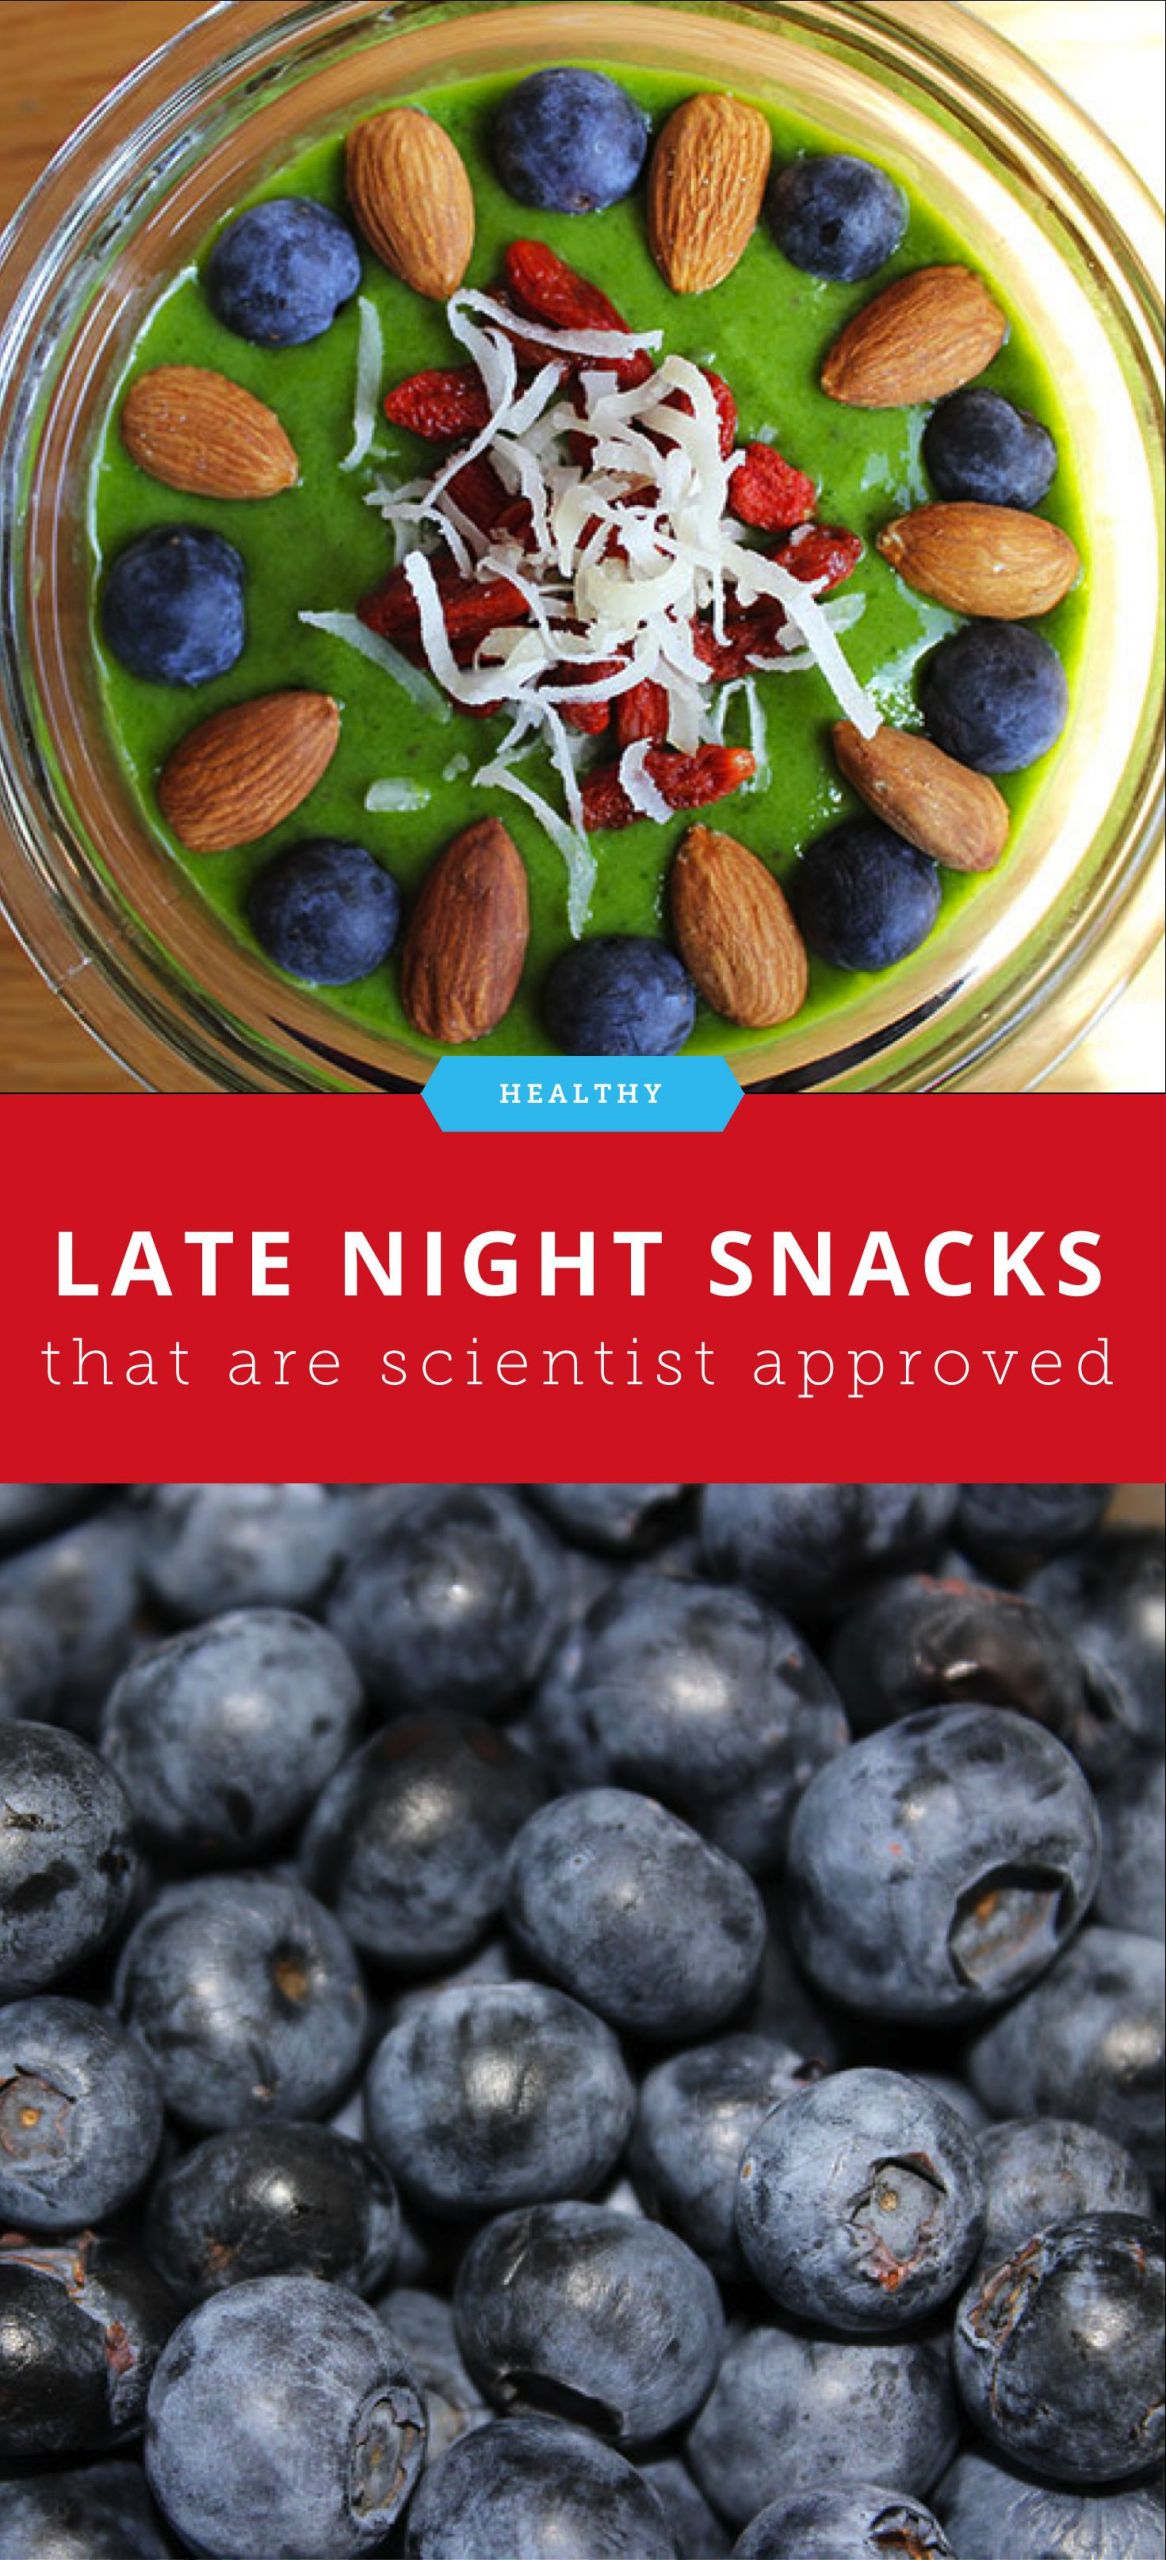 Healthy Snacks To Eat At Night
 7 Snacks Scientists Say You Can Eat at Night